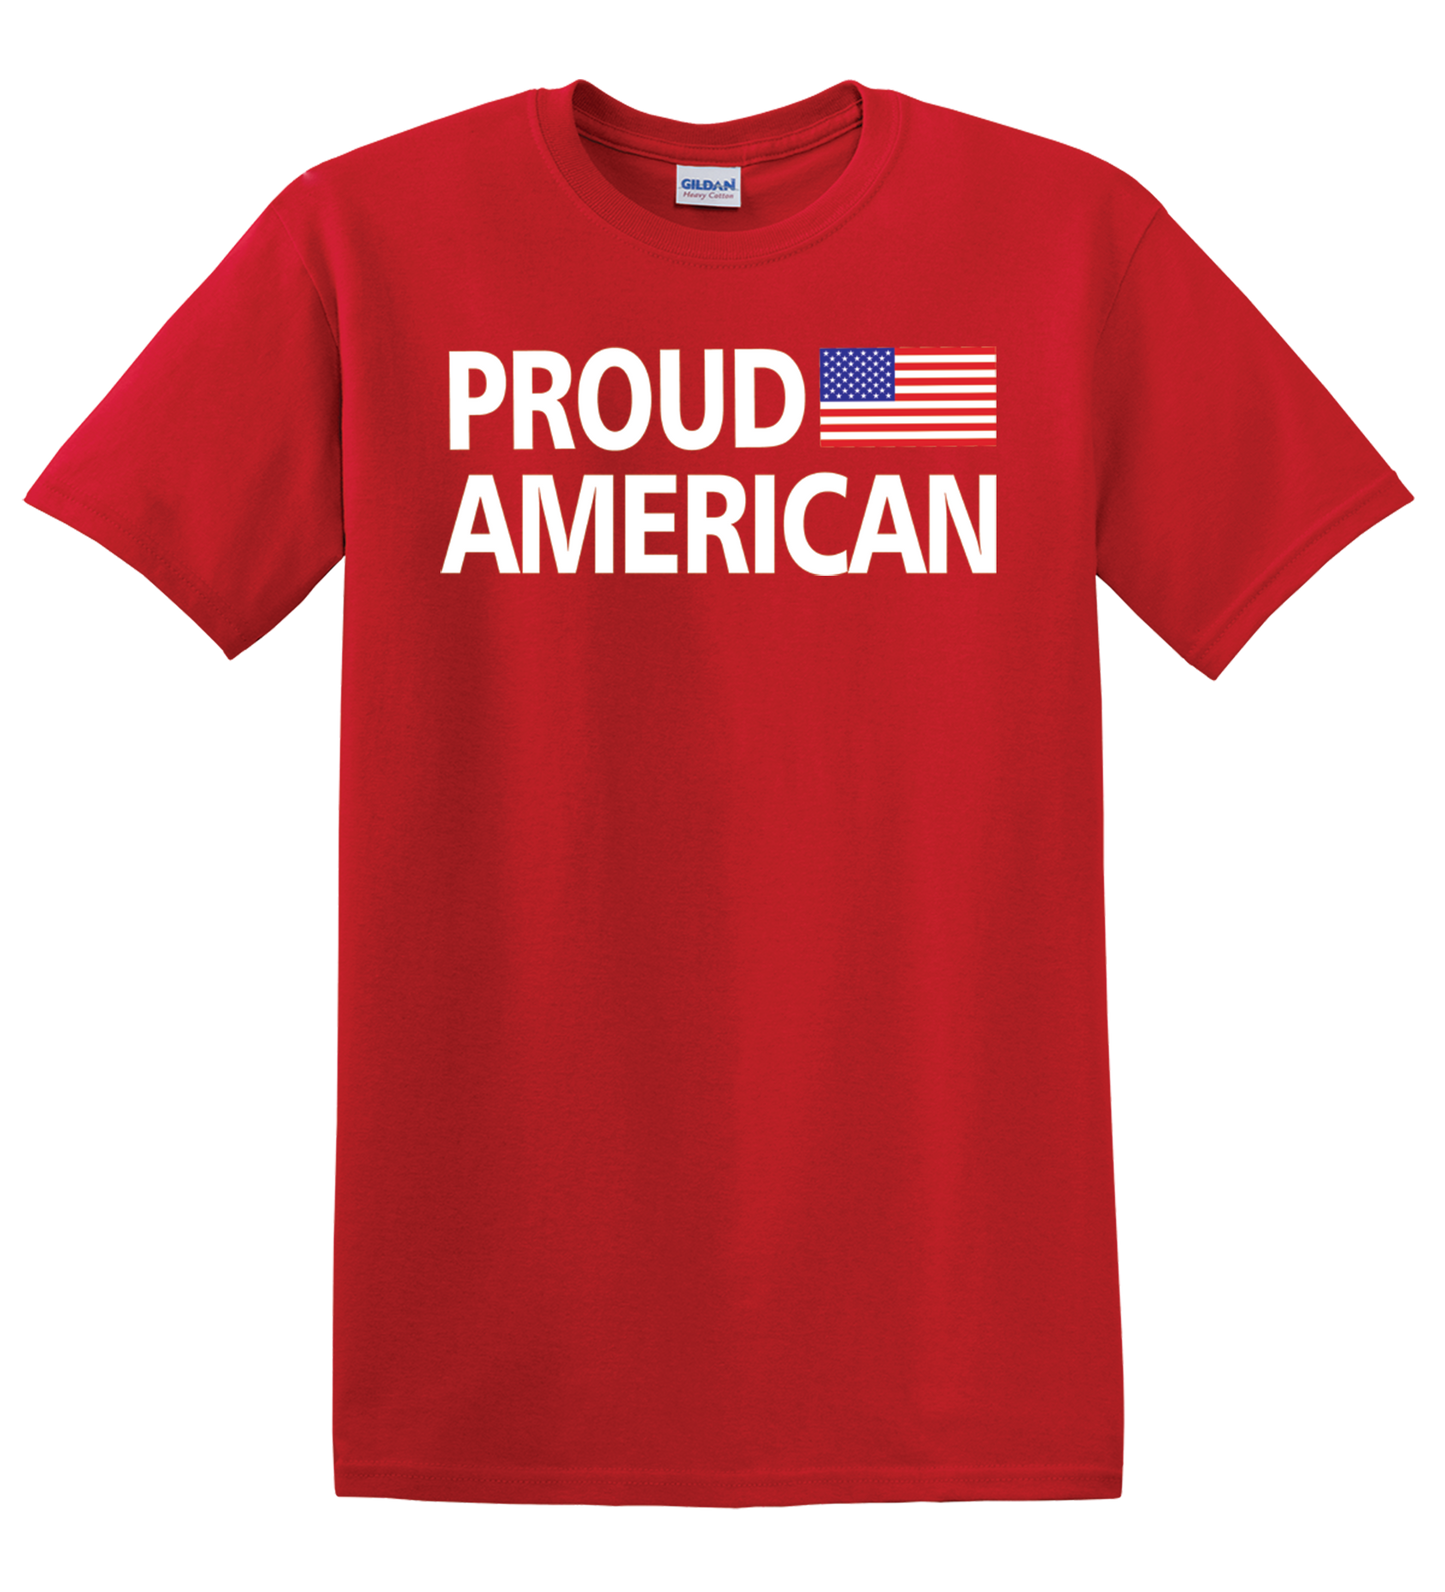 PROUD AMERICAN with USA Flag on T-Shirt